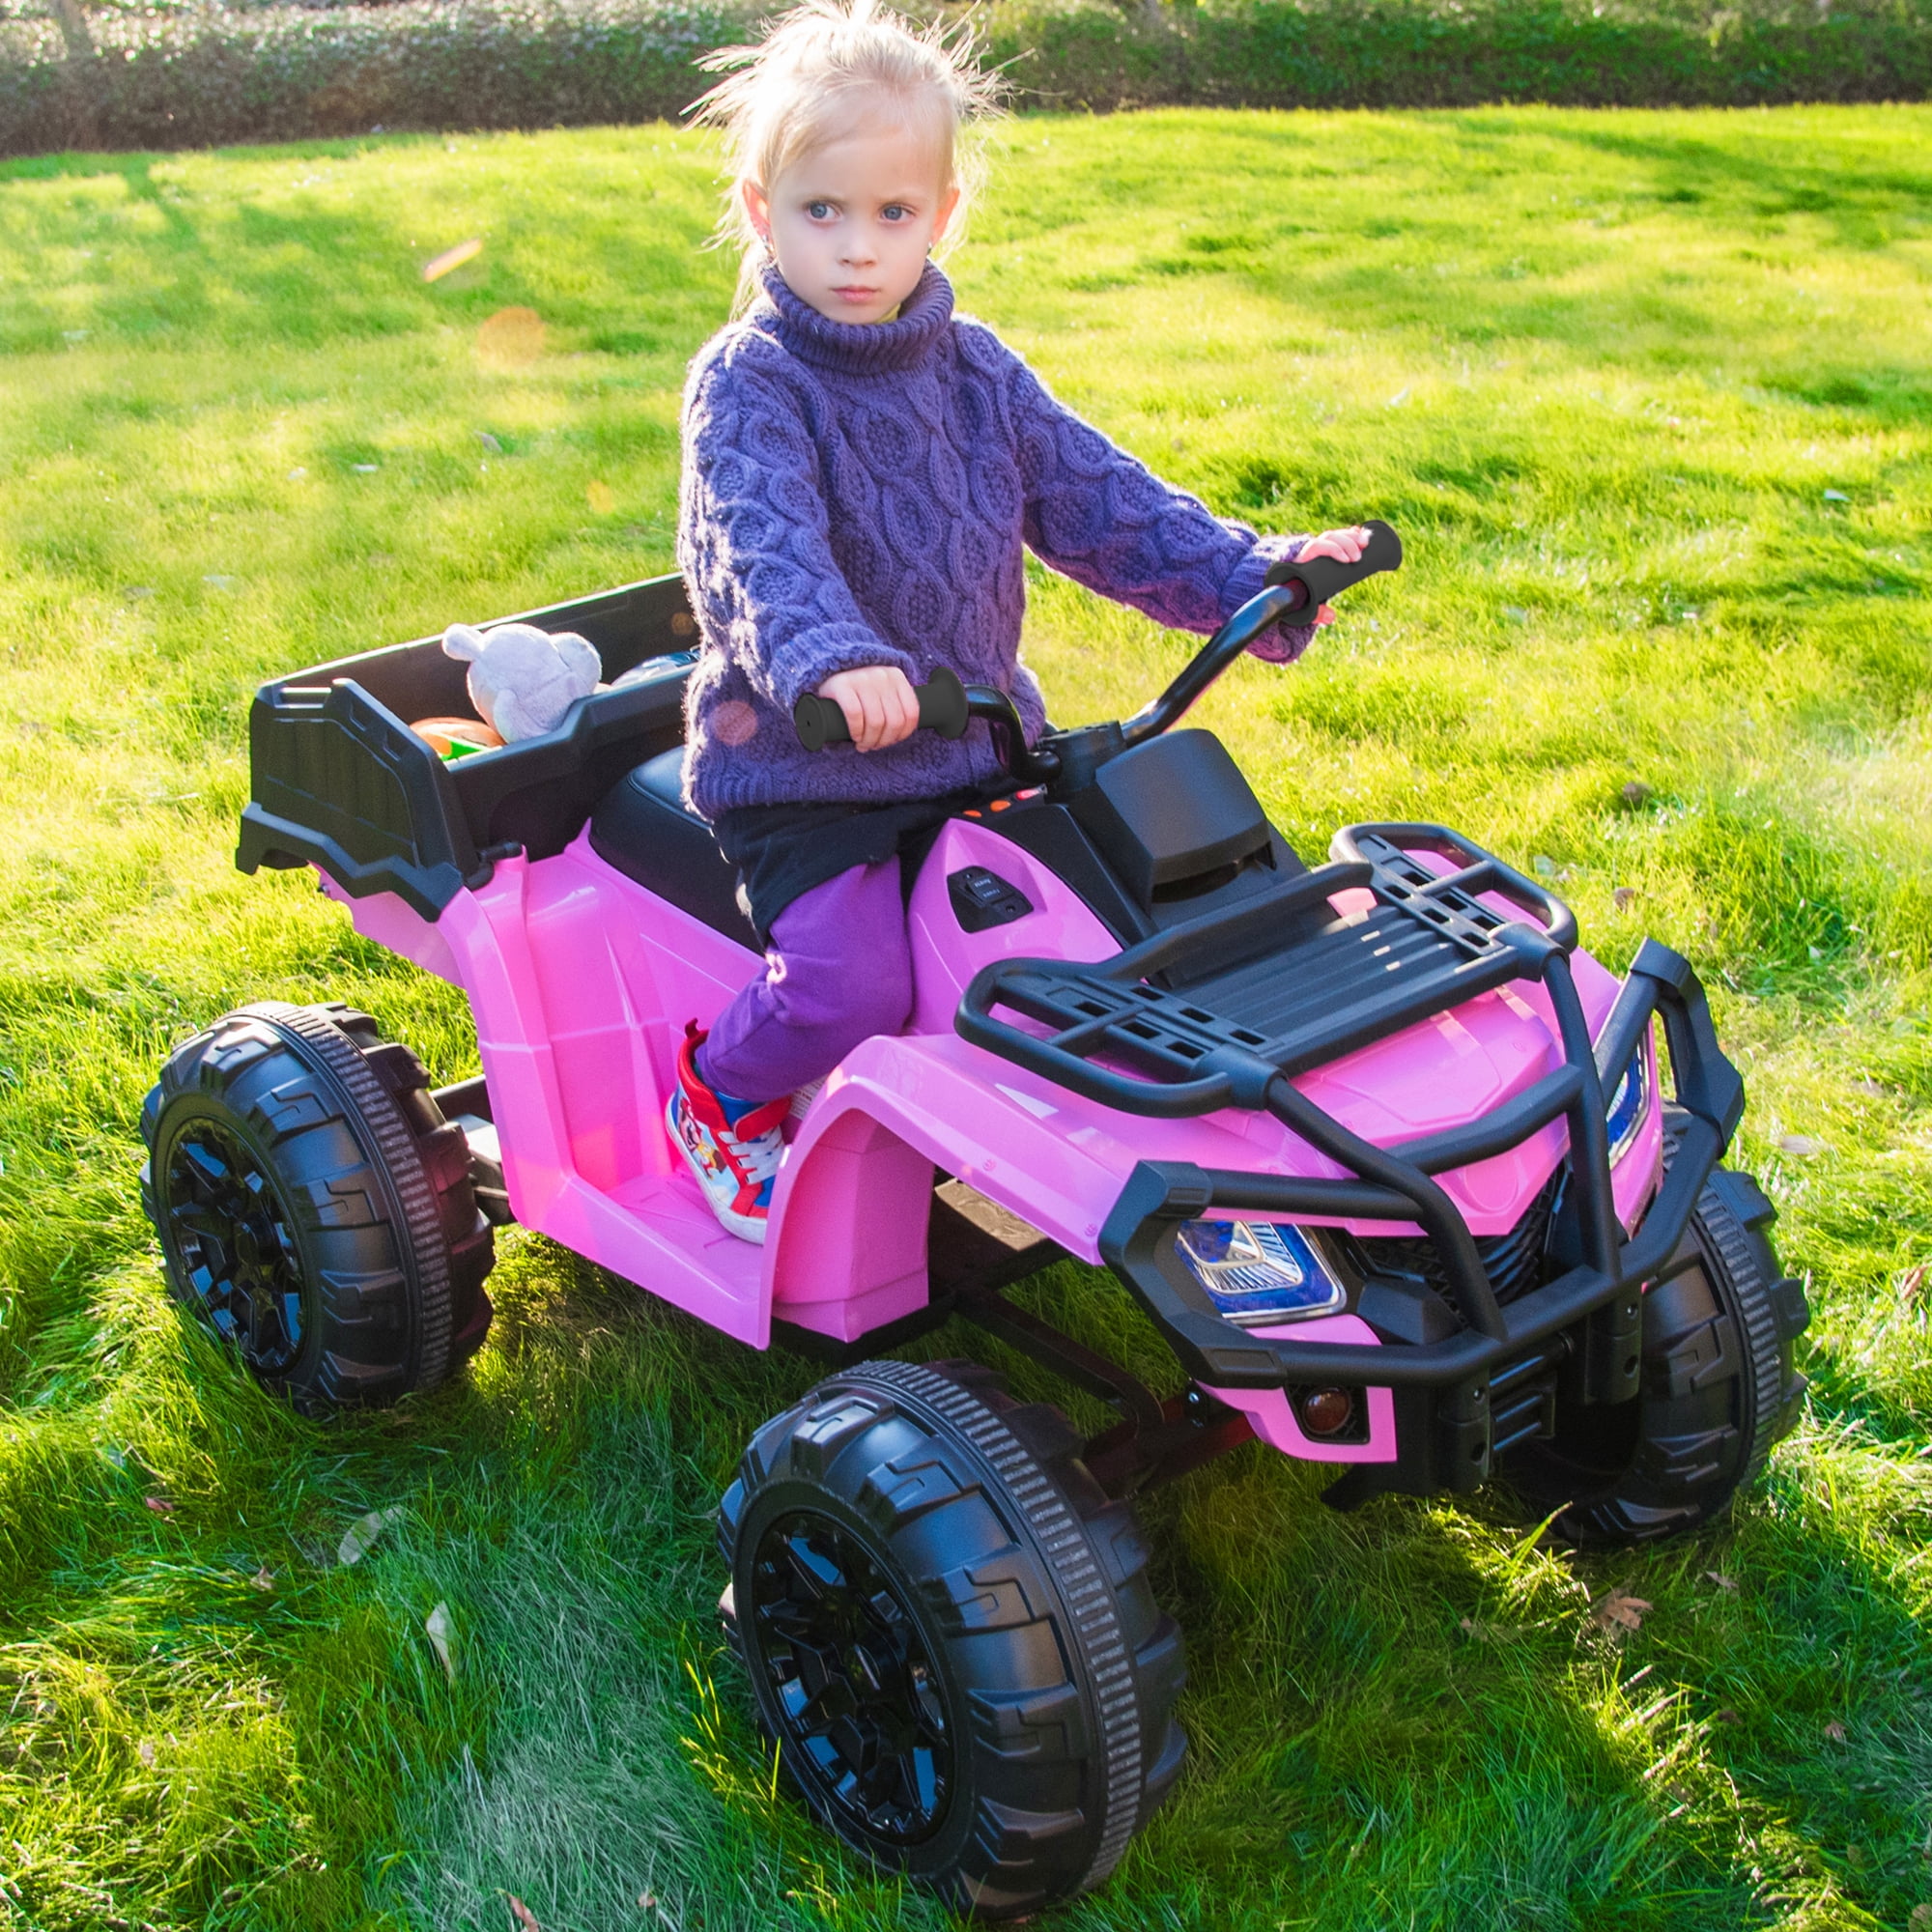 Girls ATV 4 Wheeler Kid Ride On Toy Battery Powered Quad 12 Volt Electric Riding 